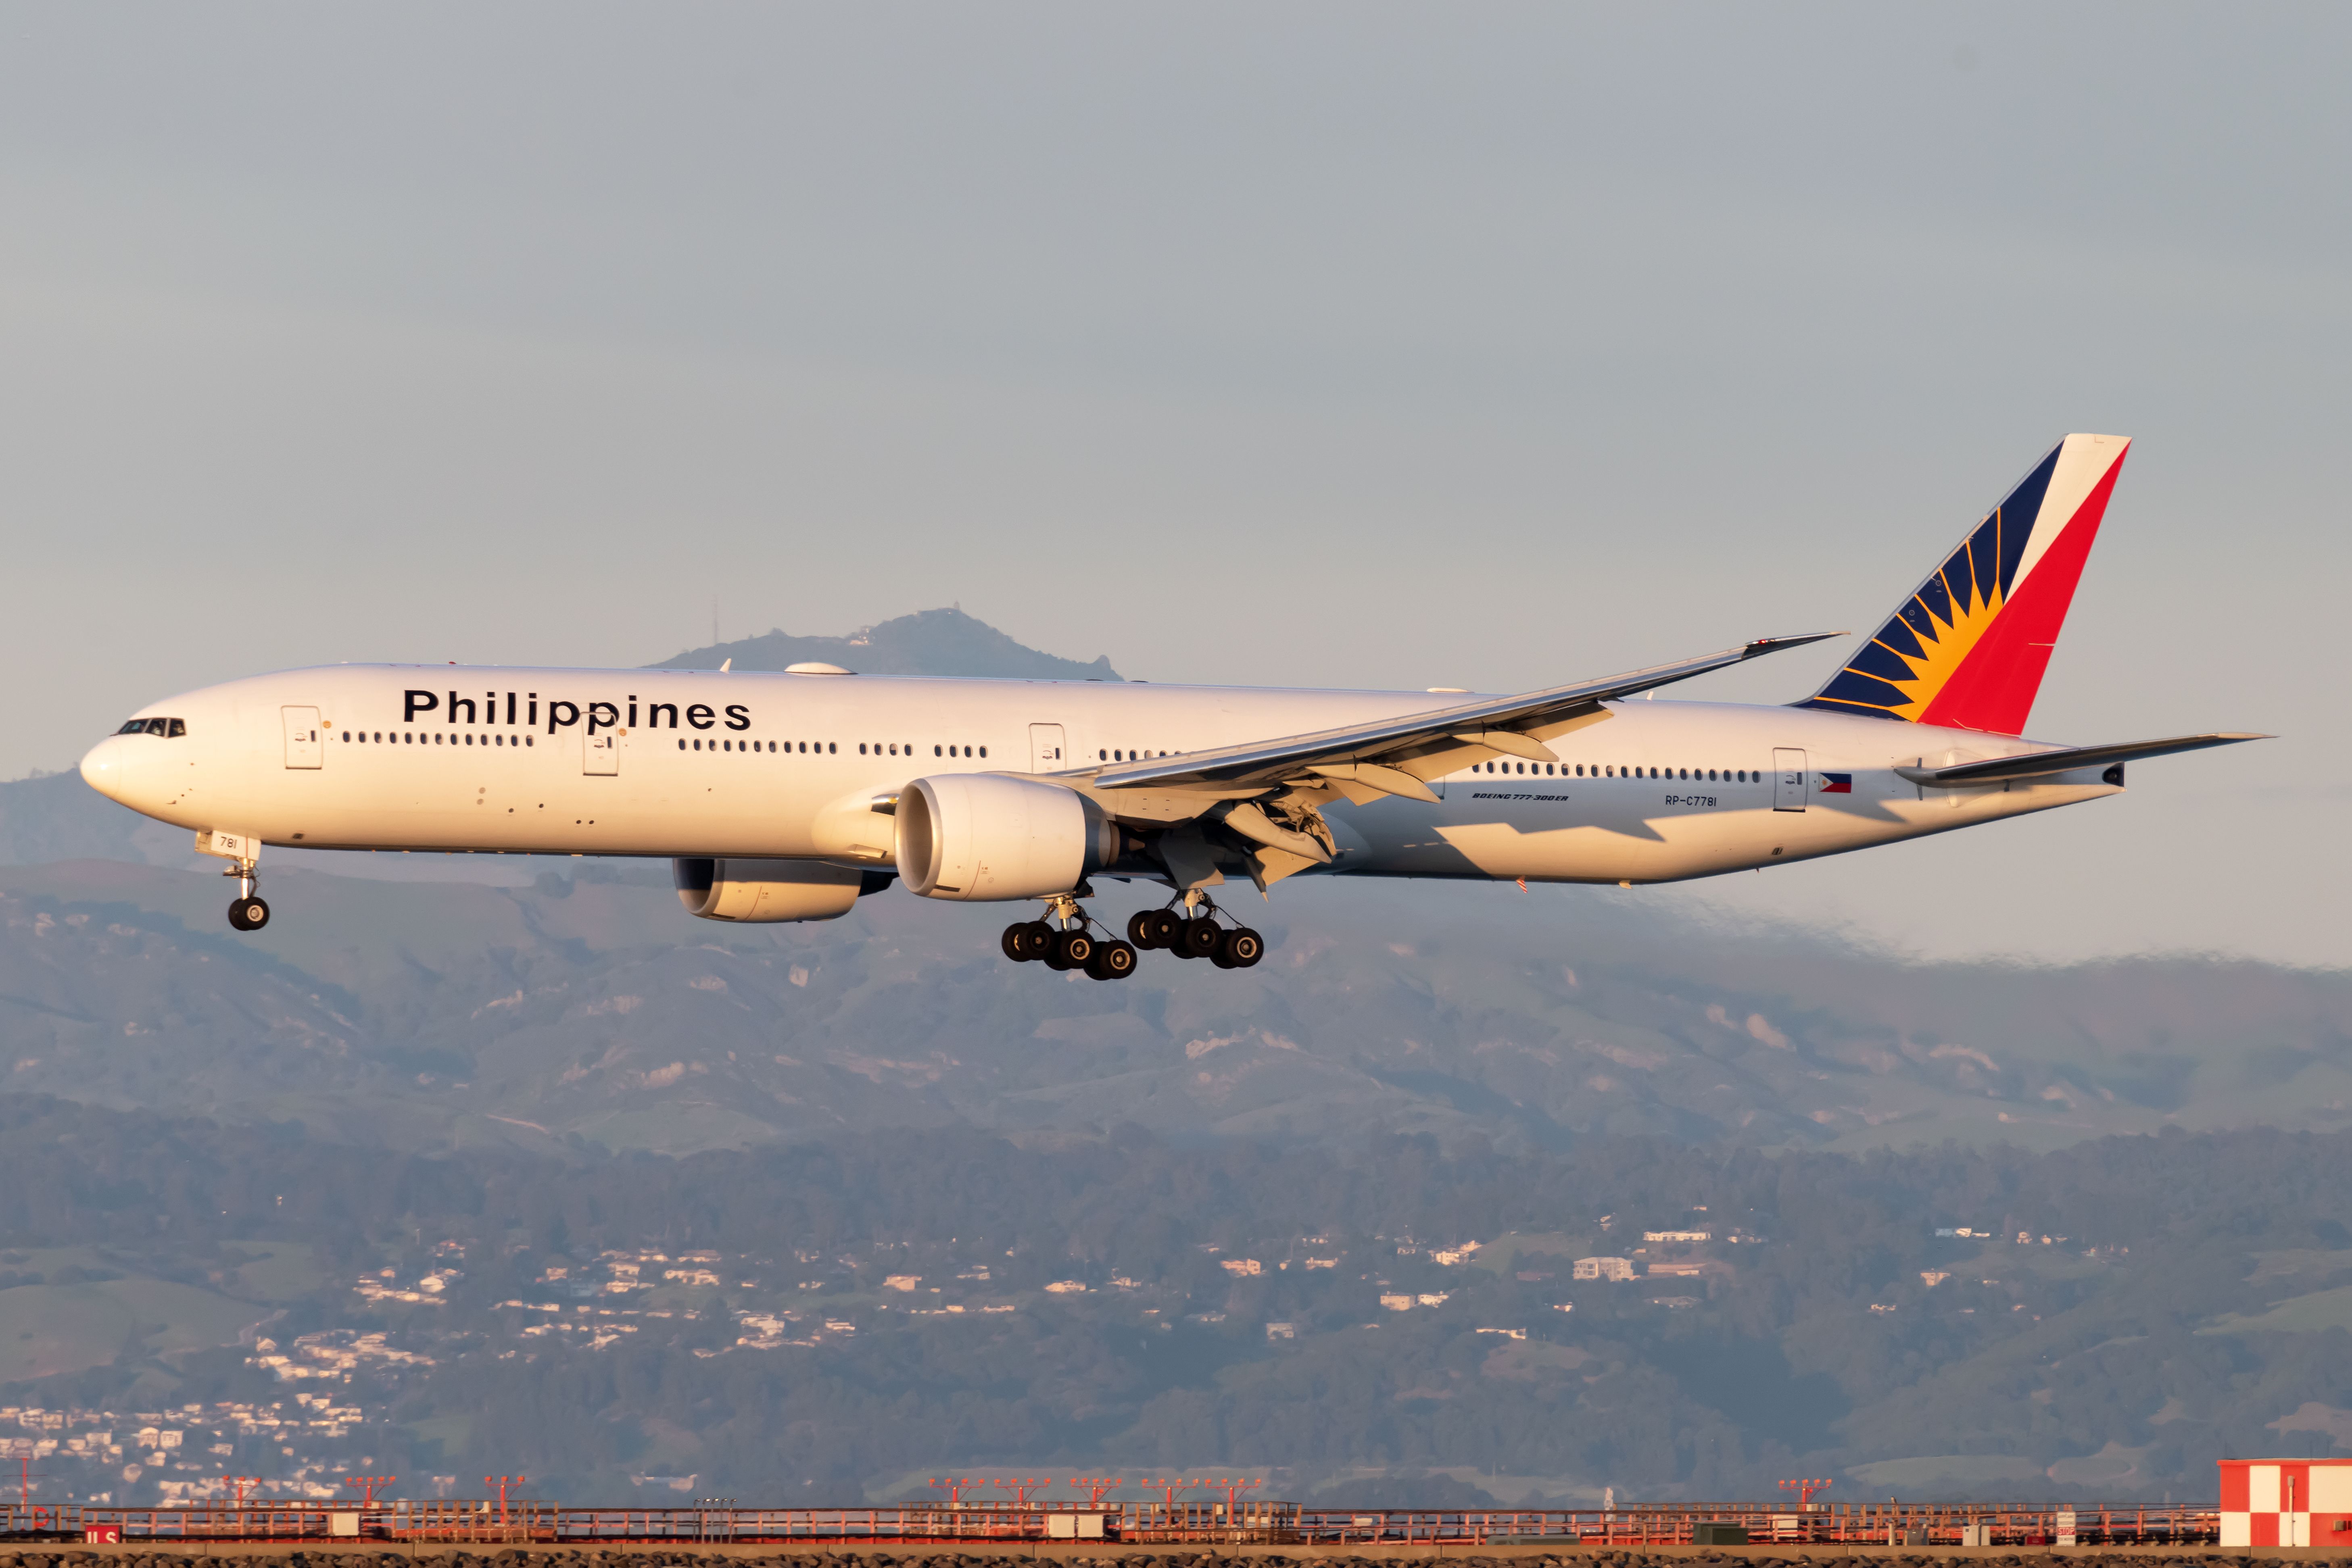 Philippine Airlines Boeing 777-300 on approach